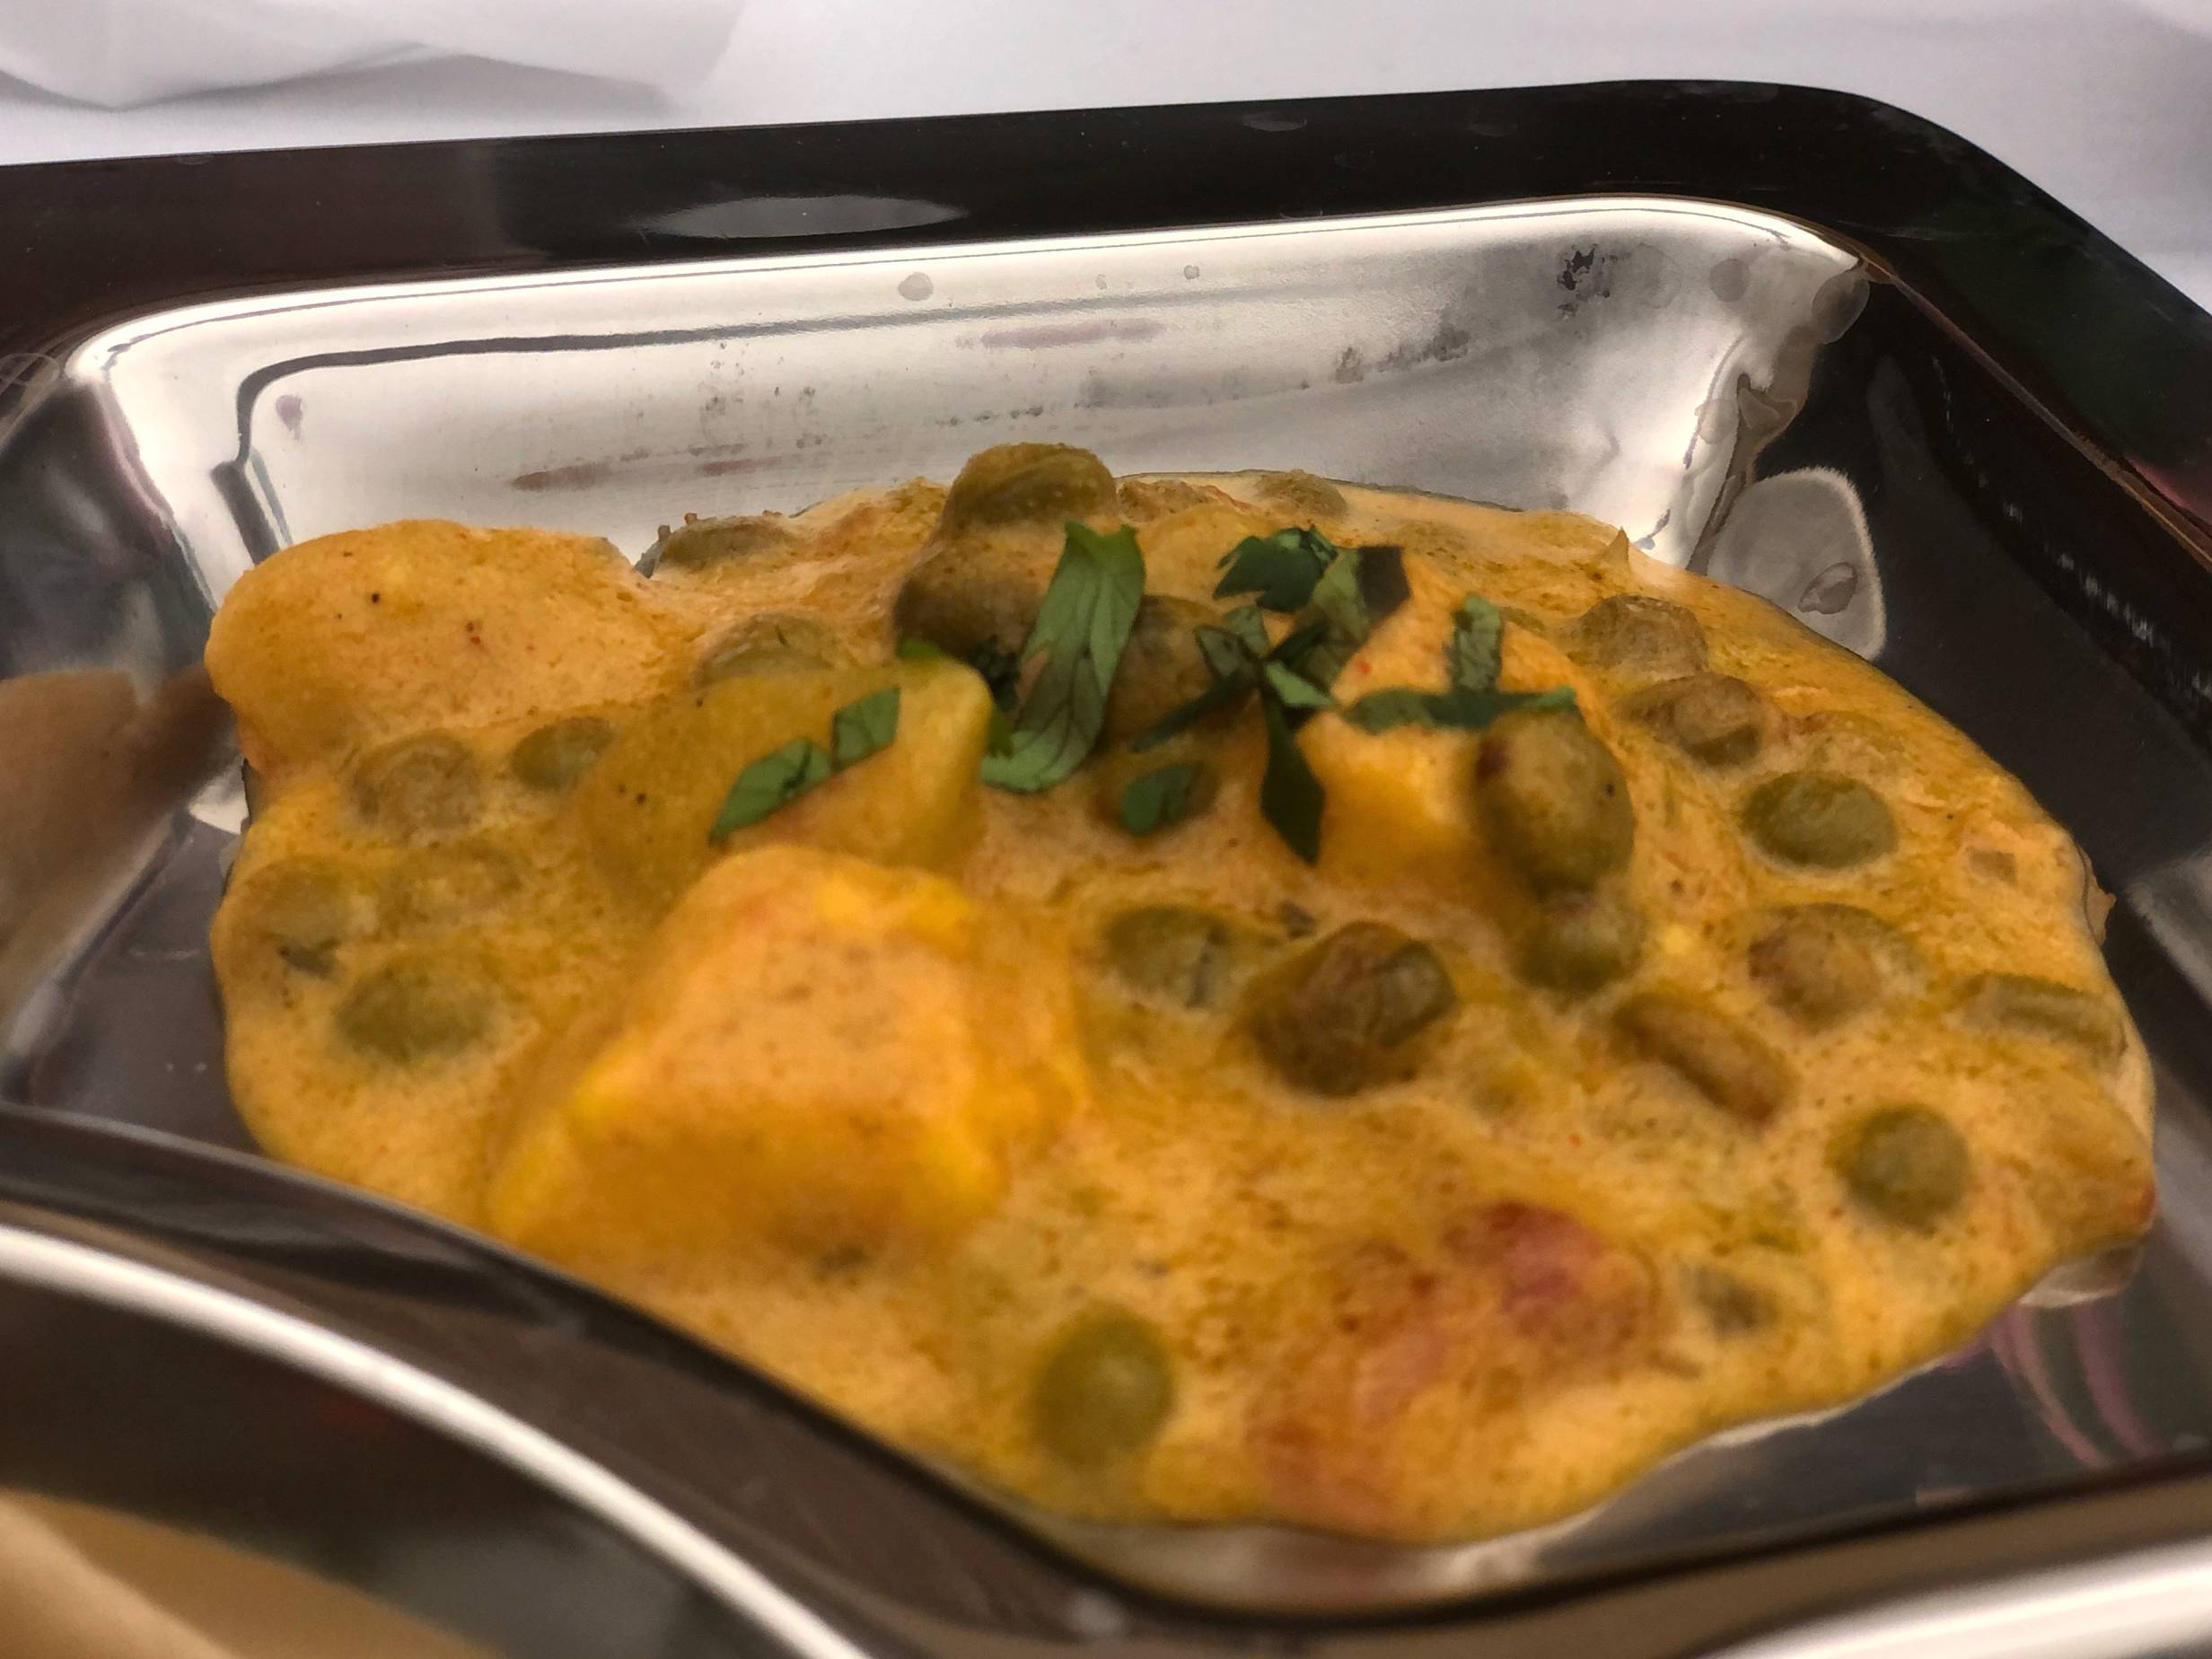 Pigeon peas, potato, and paneer in a yellow thick sauce in a divider of a metal tray. Photo by Alyssa Buckley.